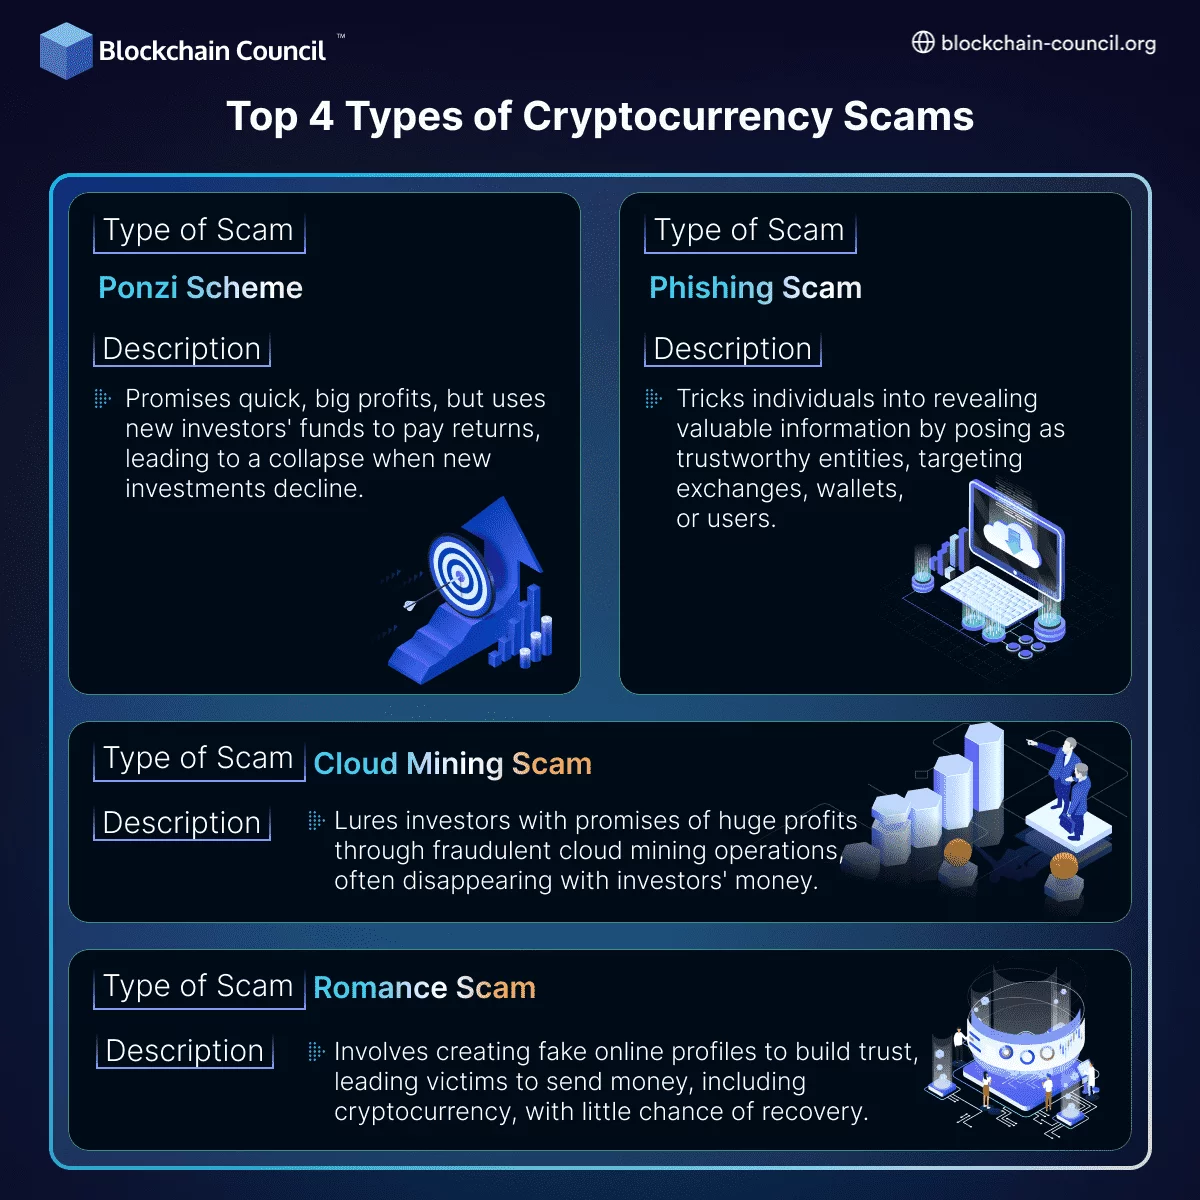 Top 4 Types of Cryptocurrency Scams